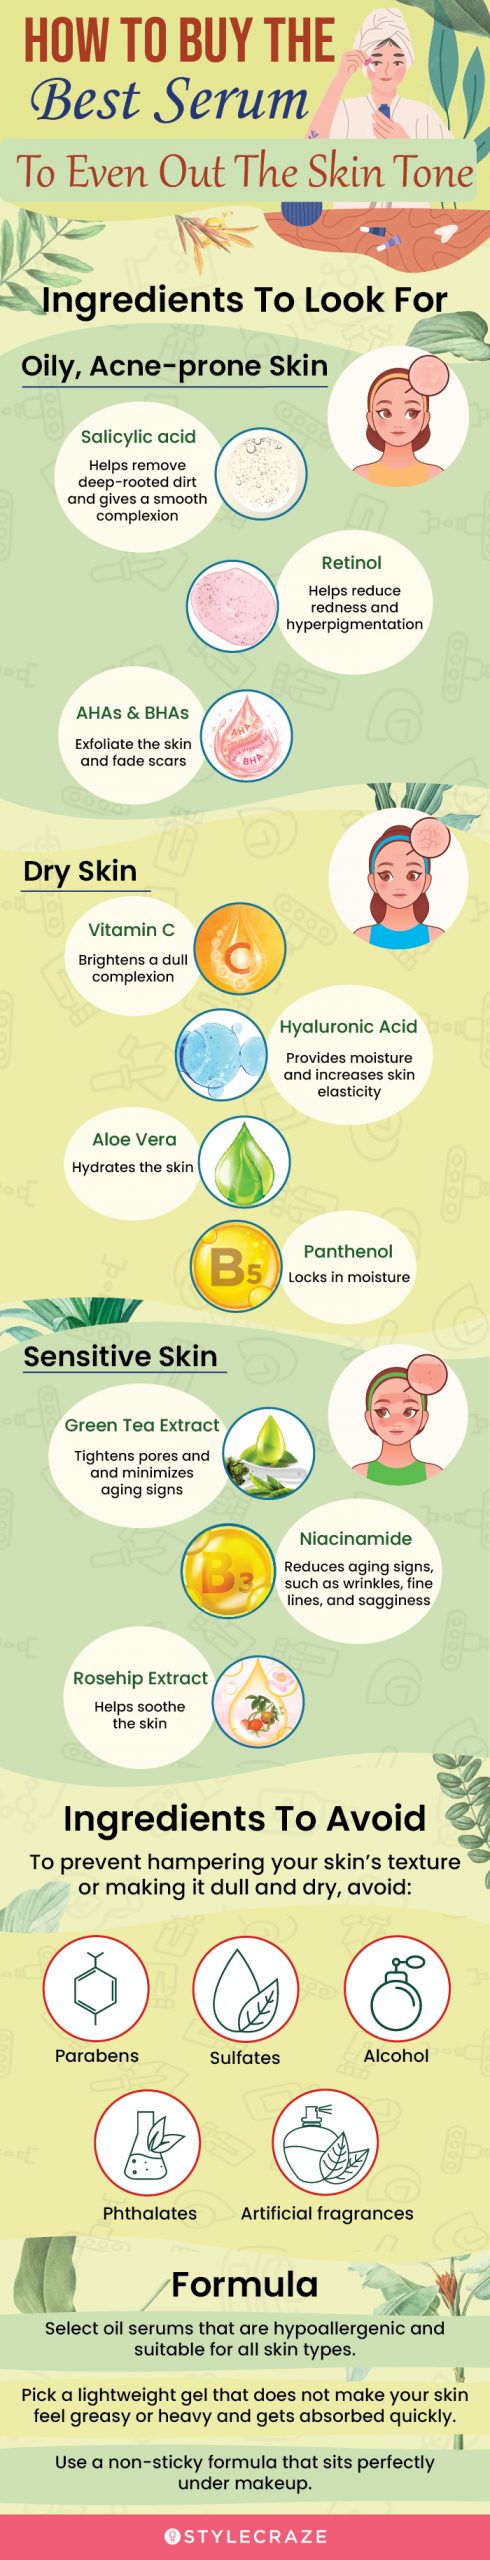 How To Buy The Best Serum To Even Out The Skin Ton (infographic)